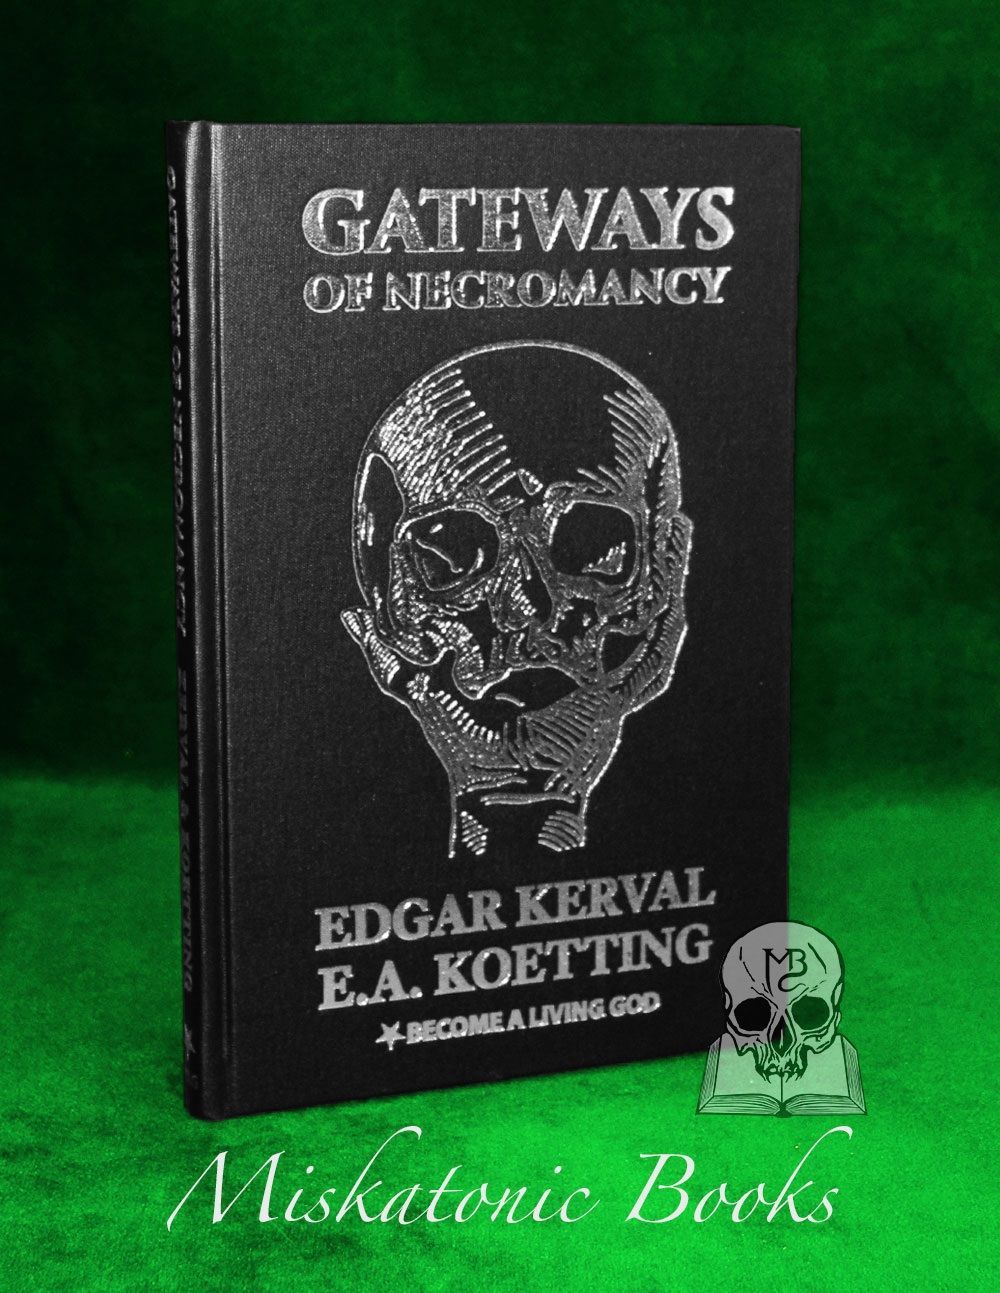 GATEWAYS OF NECROMANCY: Grimoire of Death Magick by Edgar Kerval and E.A. Koetting - Hardcover Edition